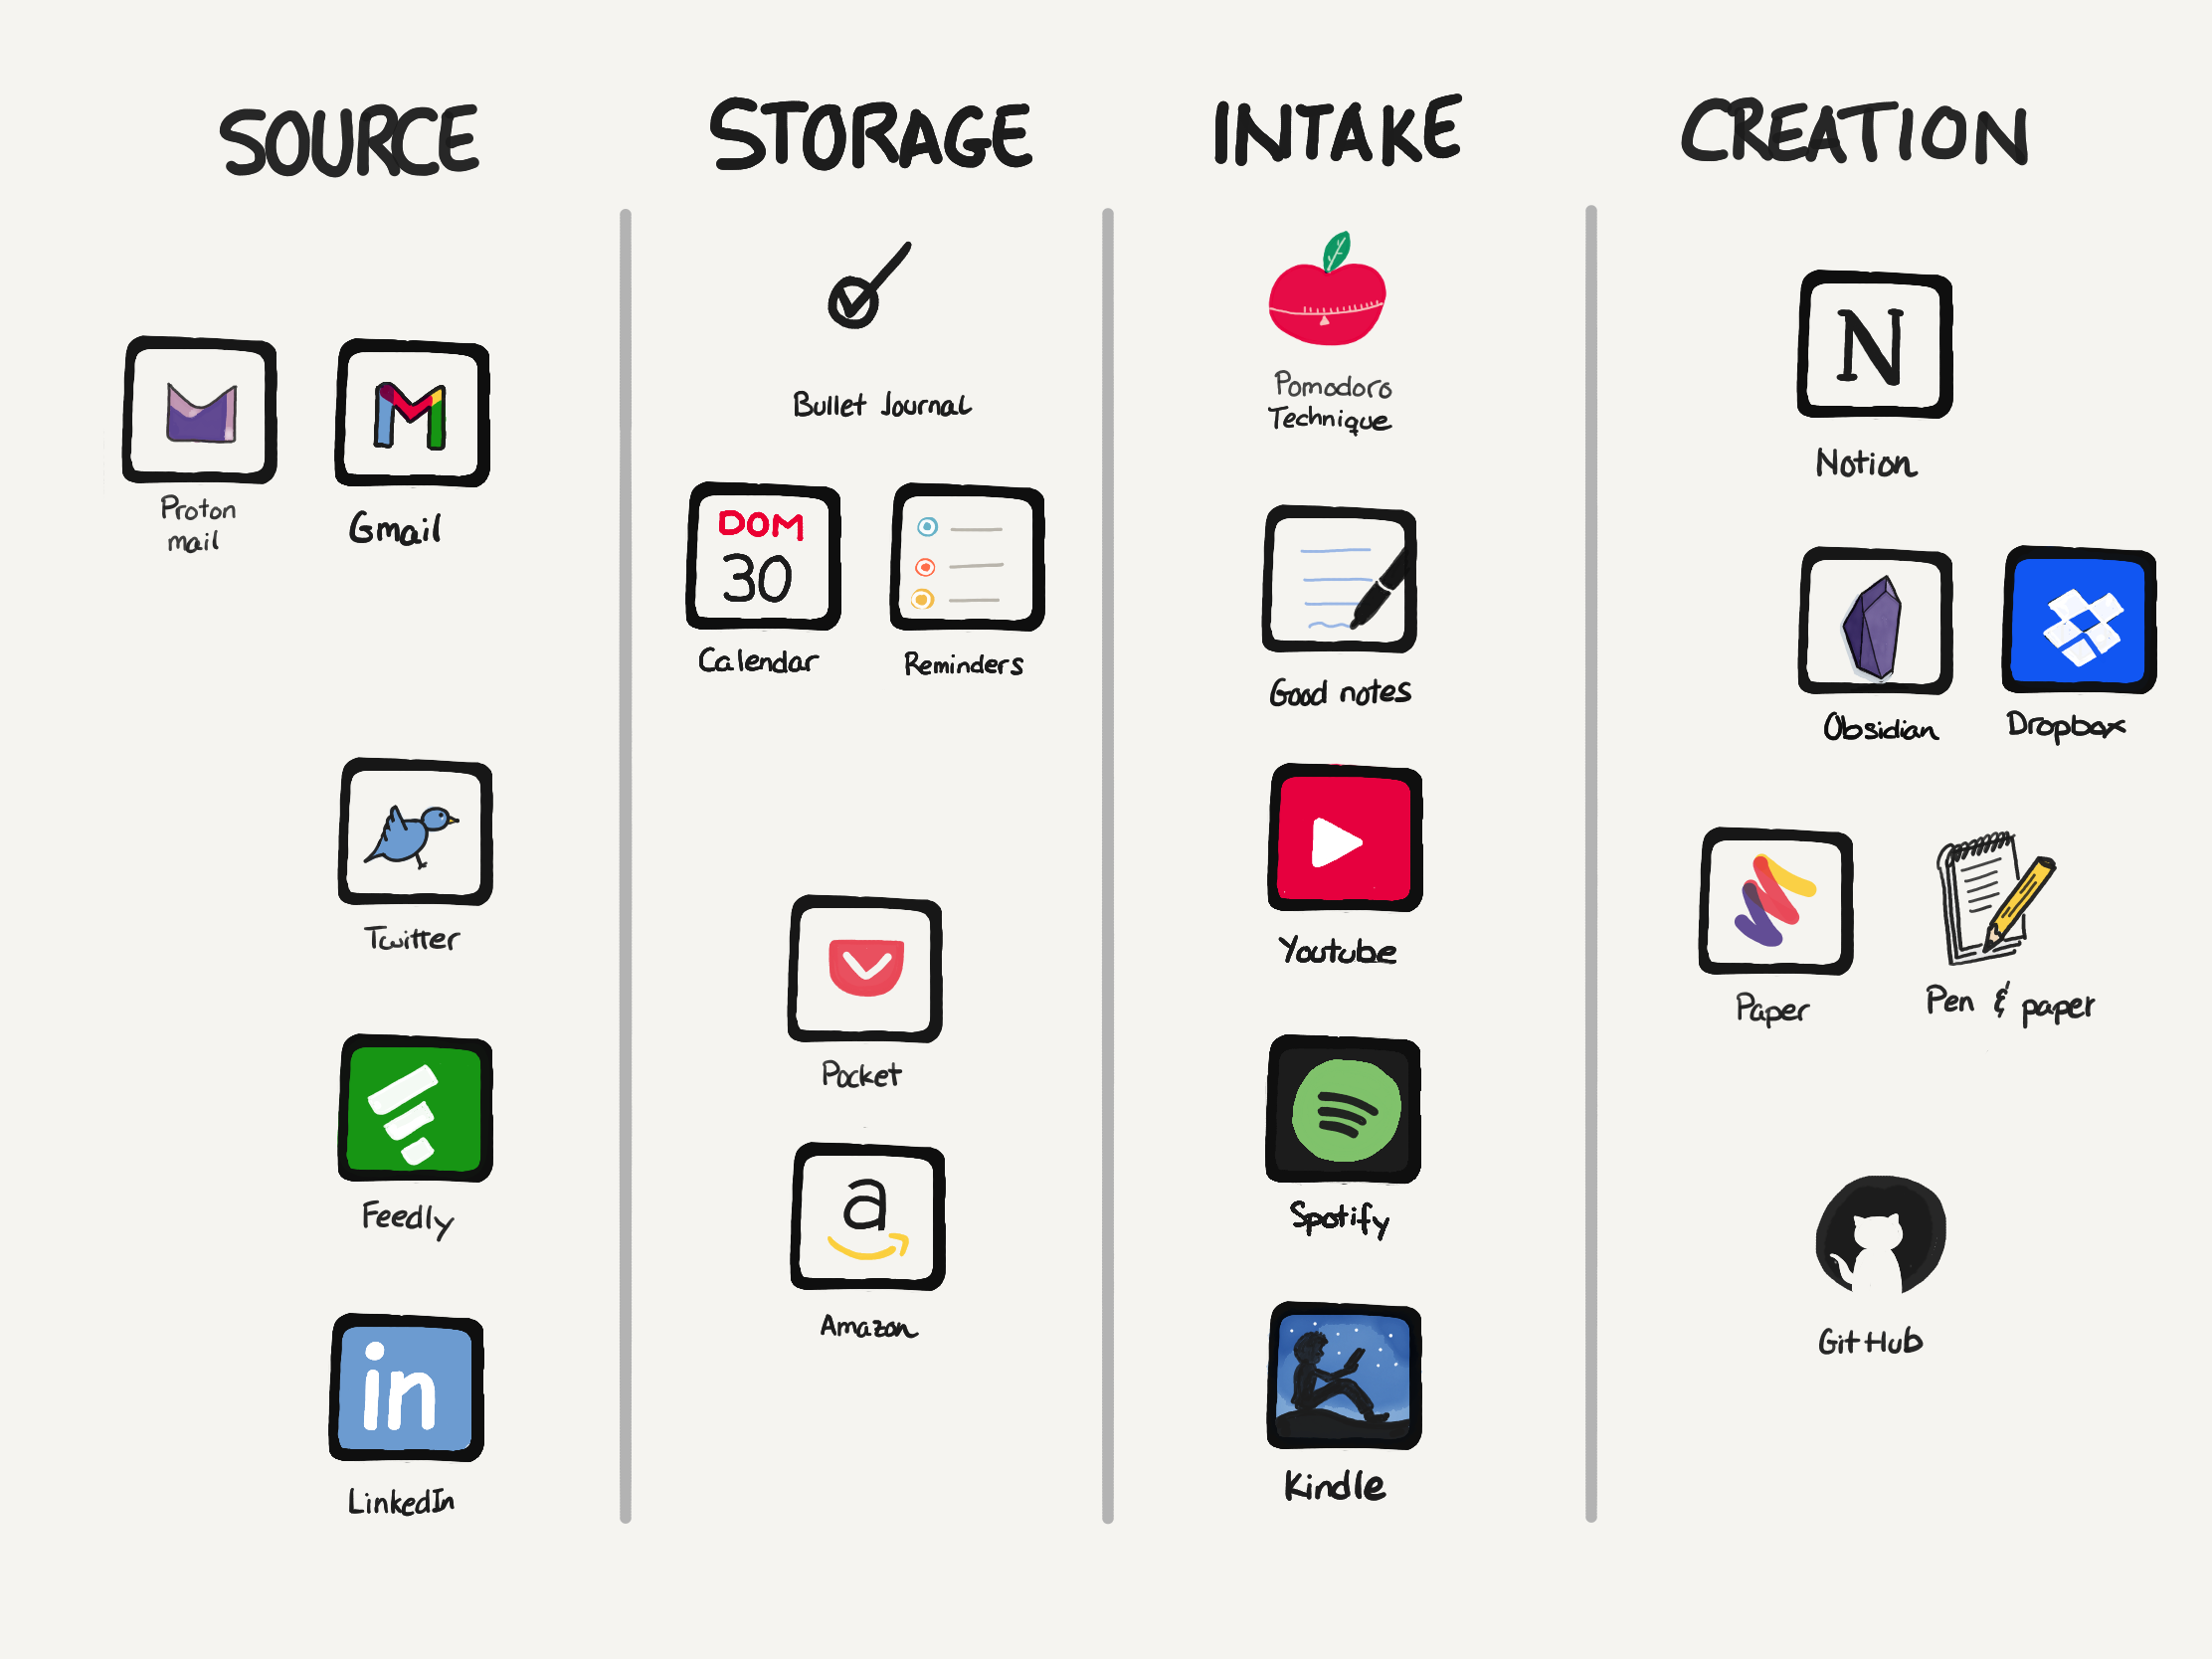 Tools organized into categories